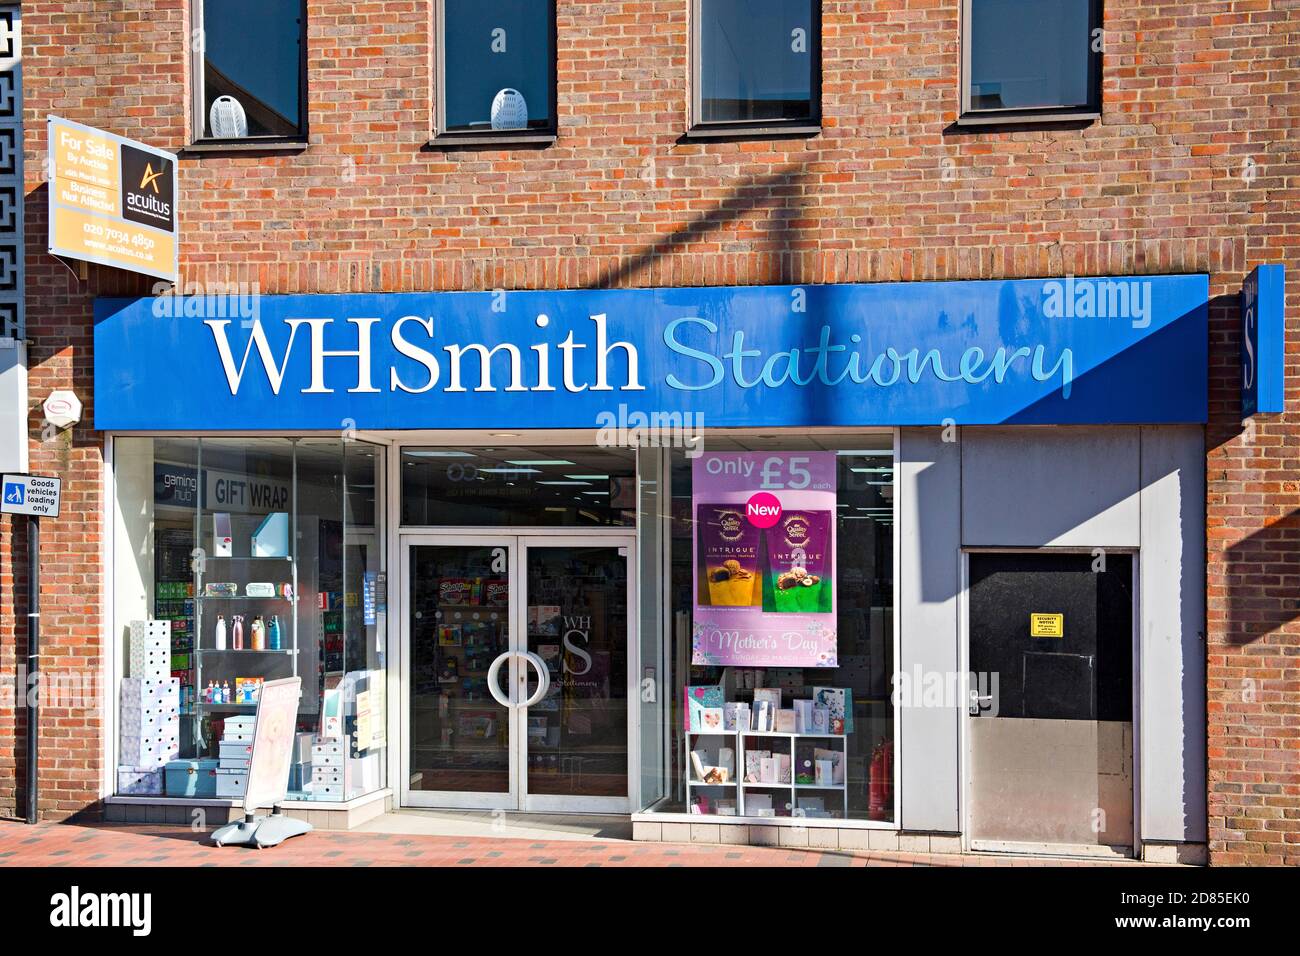 WH Smith stationery retailer in High Street location Stock Photo